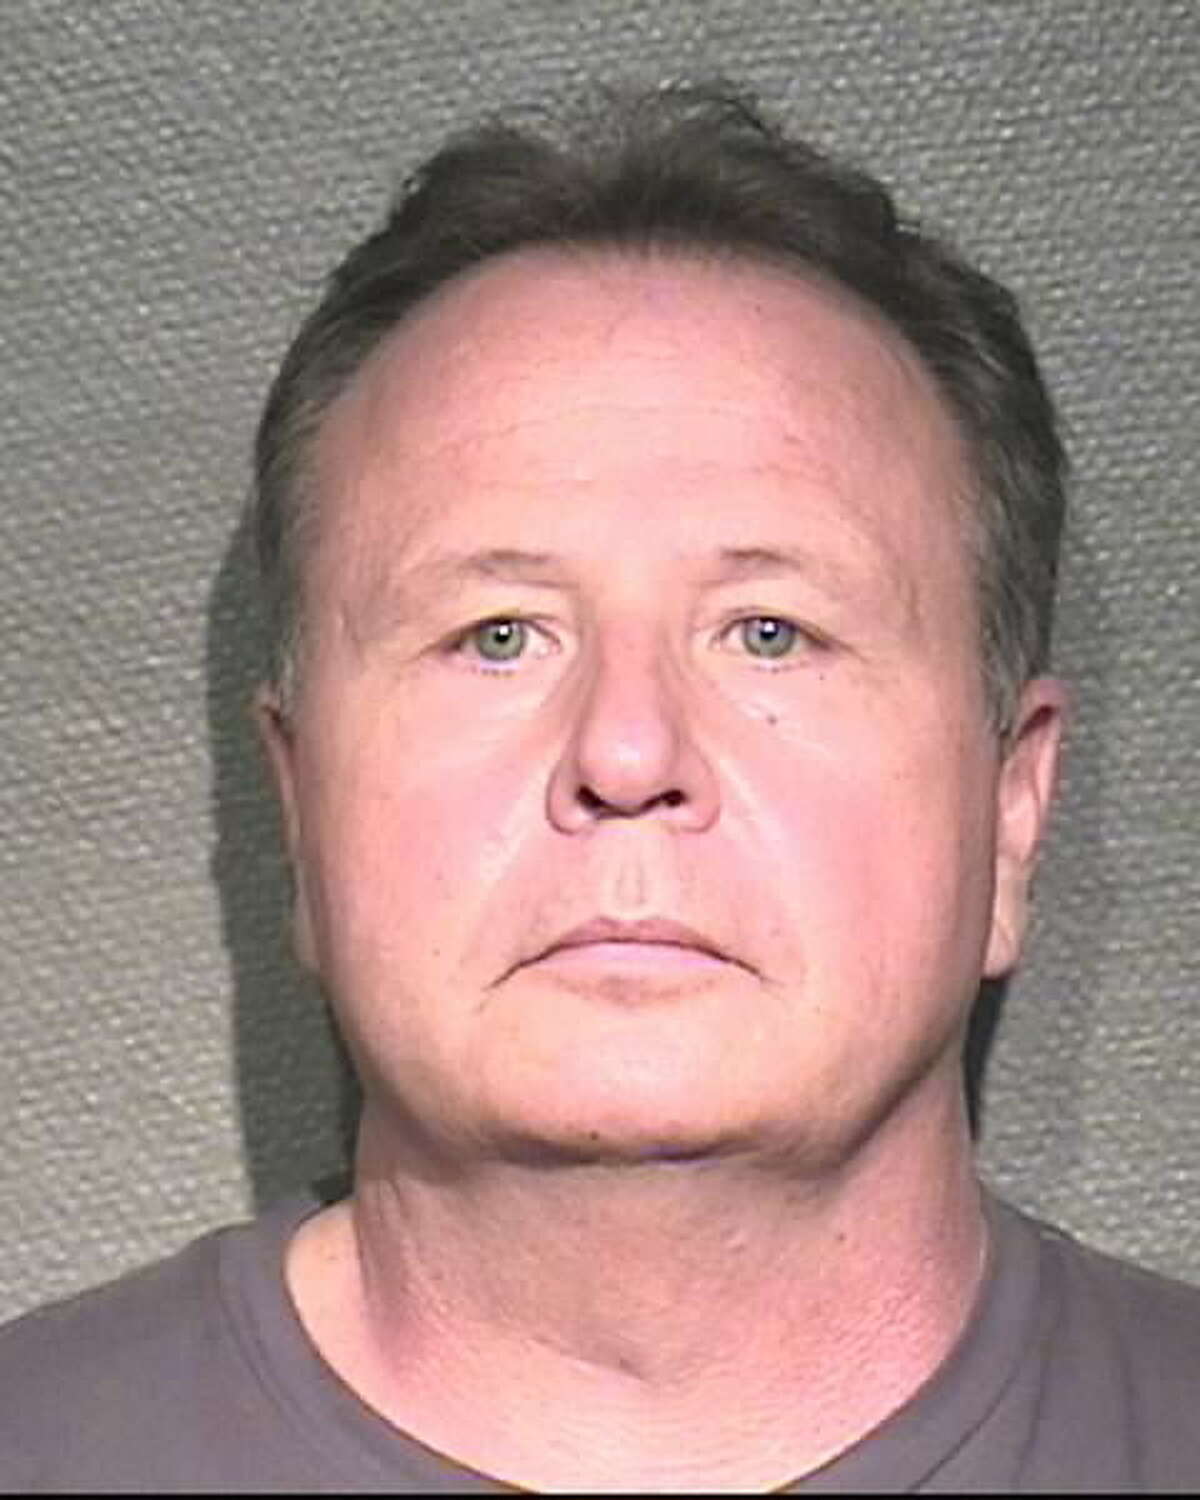 Robert Teweleit is a longtime officer with the Houston Police Department who was arrested and charged with prostitution during a 10-day sting at a former massage parlor turned brothel that was taken over in early October by HPD. Swipe through to see photos of the other men arrested in the massive prostitution sting. 